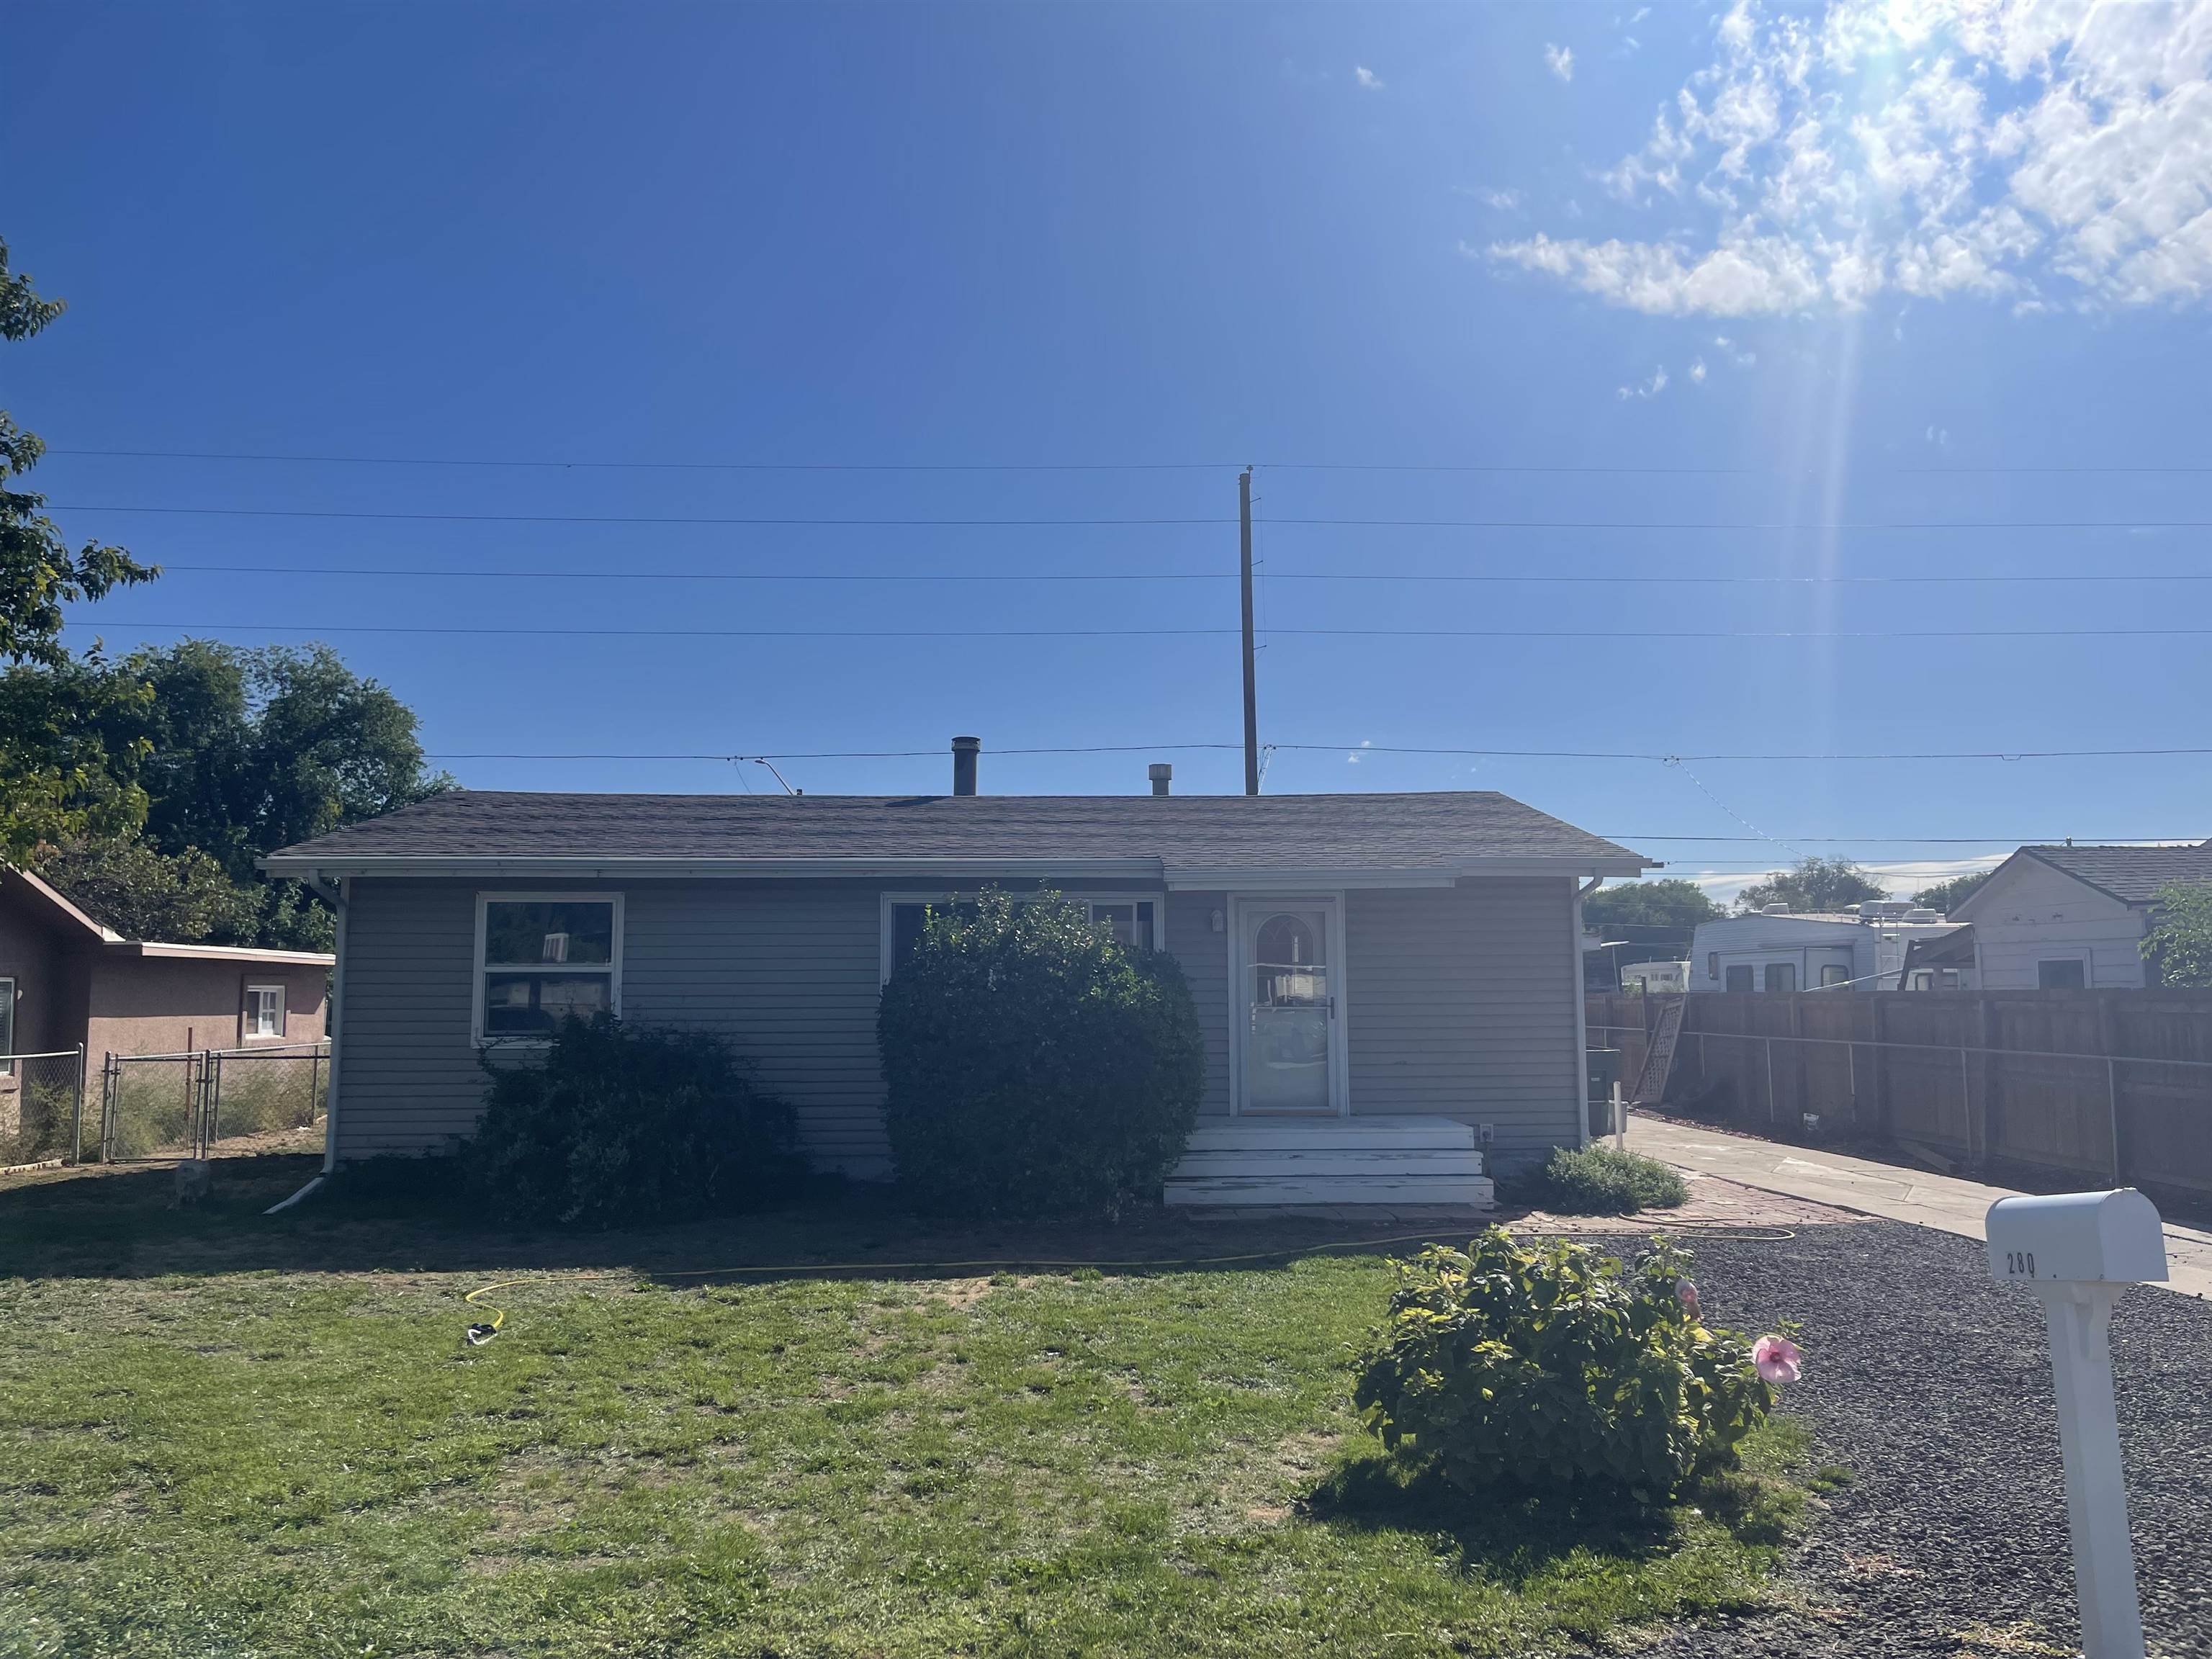 Seller has been working hard to make sure this home is ready for new owners and now is your chance!  This 988 sf home with 2 bedrooms, 1 bath sits on a .20 acre lot with a 1-car detached garage and RV parking inside fence with access from 27 1/2 Road.  In the last year this home has been blessed with fresh interior paint, new flooring, a new commode.  New water heater was installed in 2022.  Windows throughout, bathroom remodel and plumbing under the home replaced in 2010.